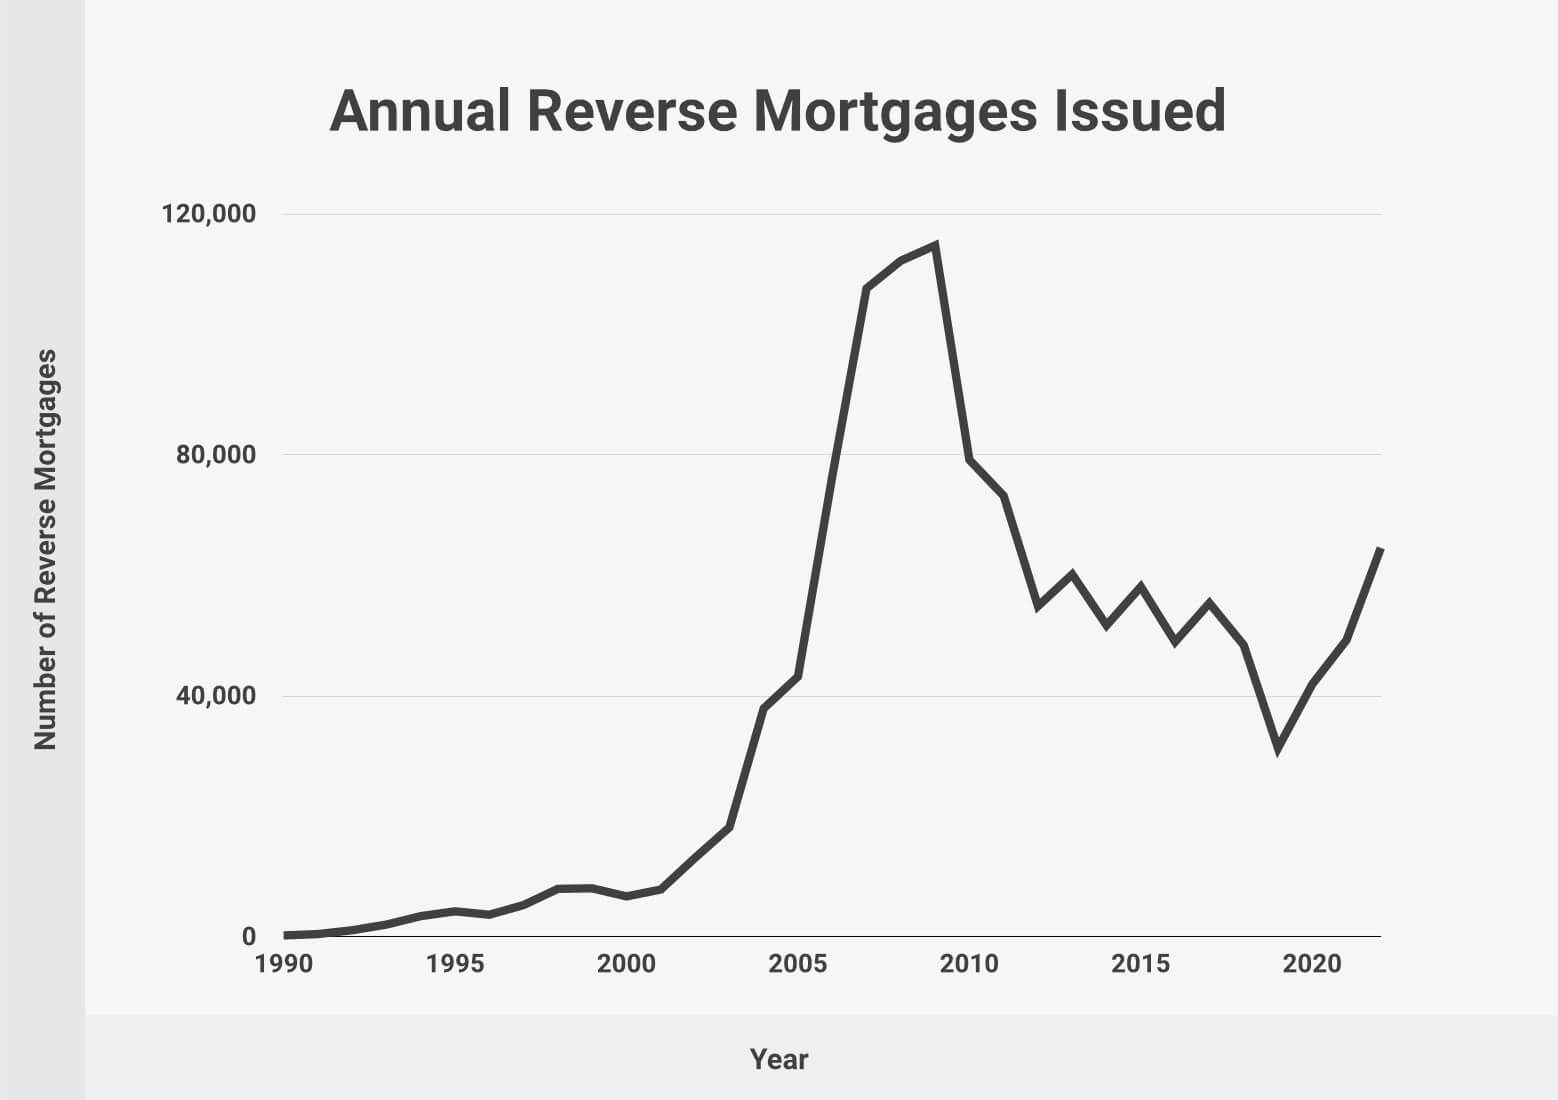 Annual Reverse Mortgages Issued 